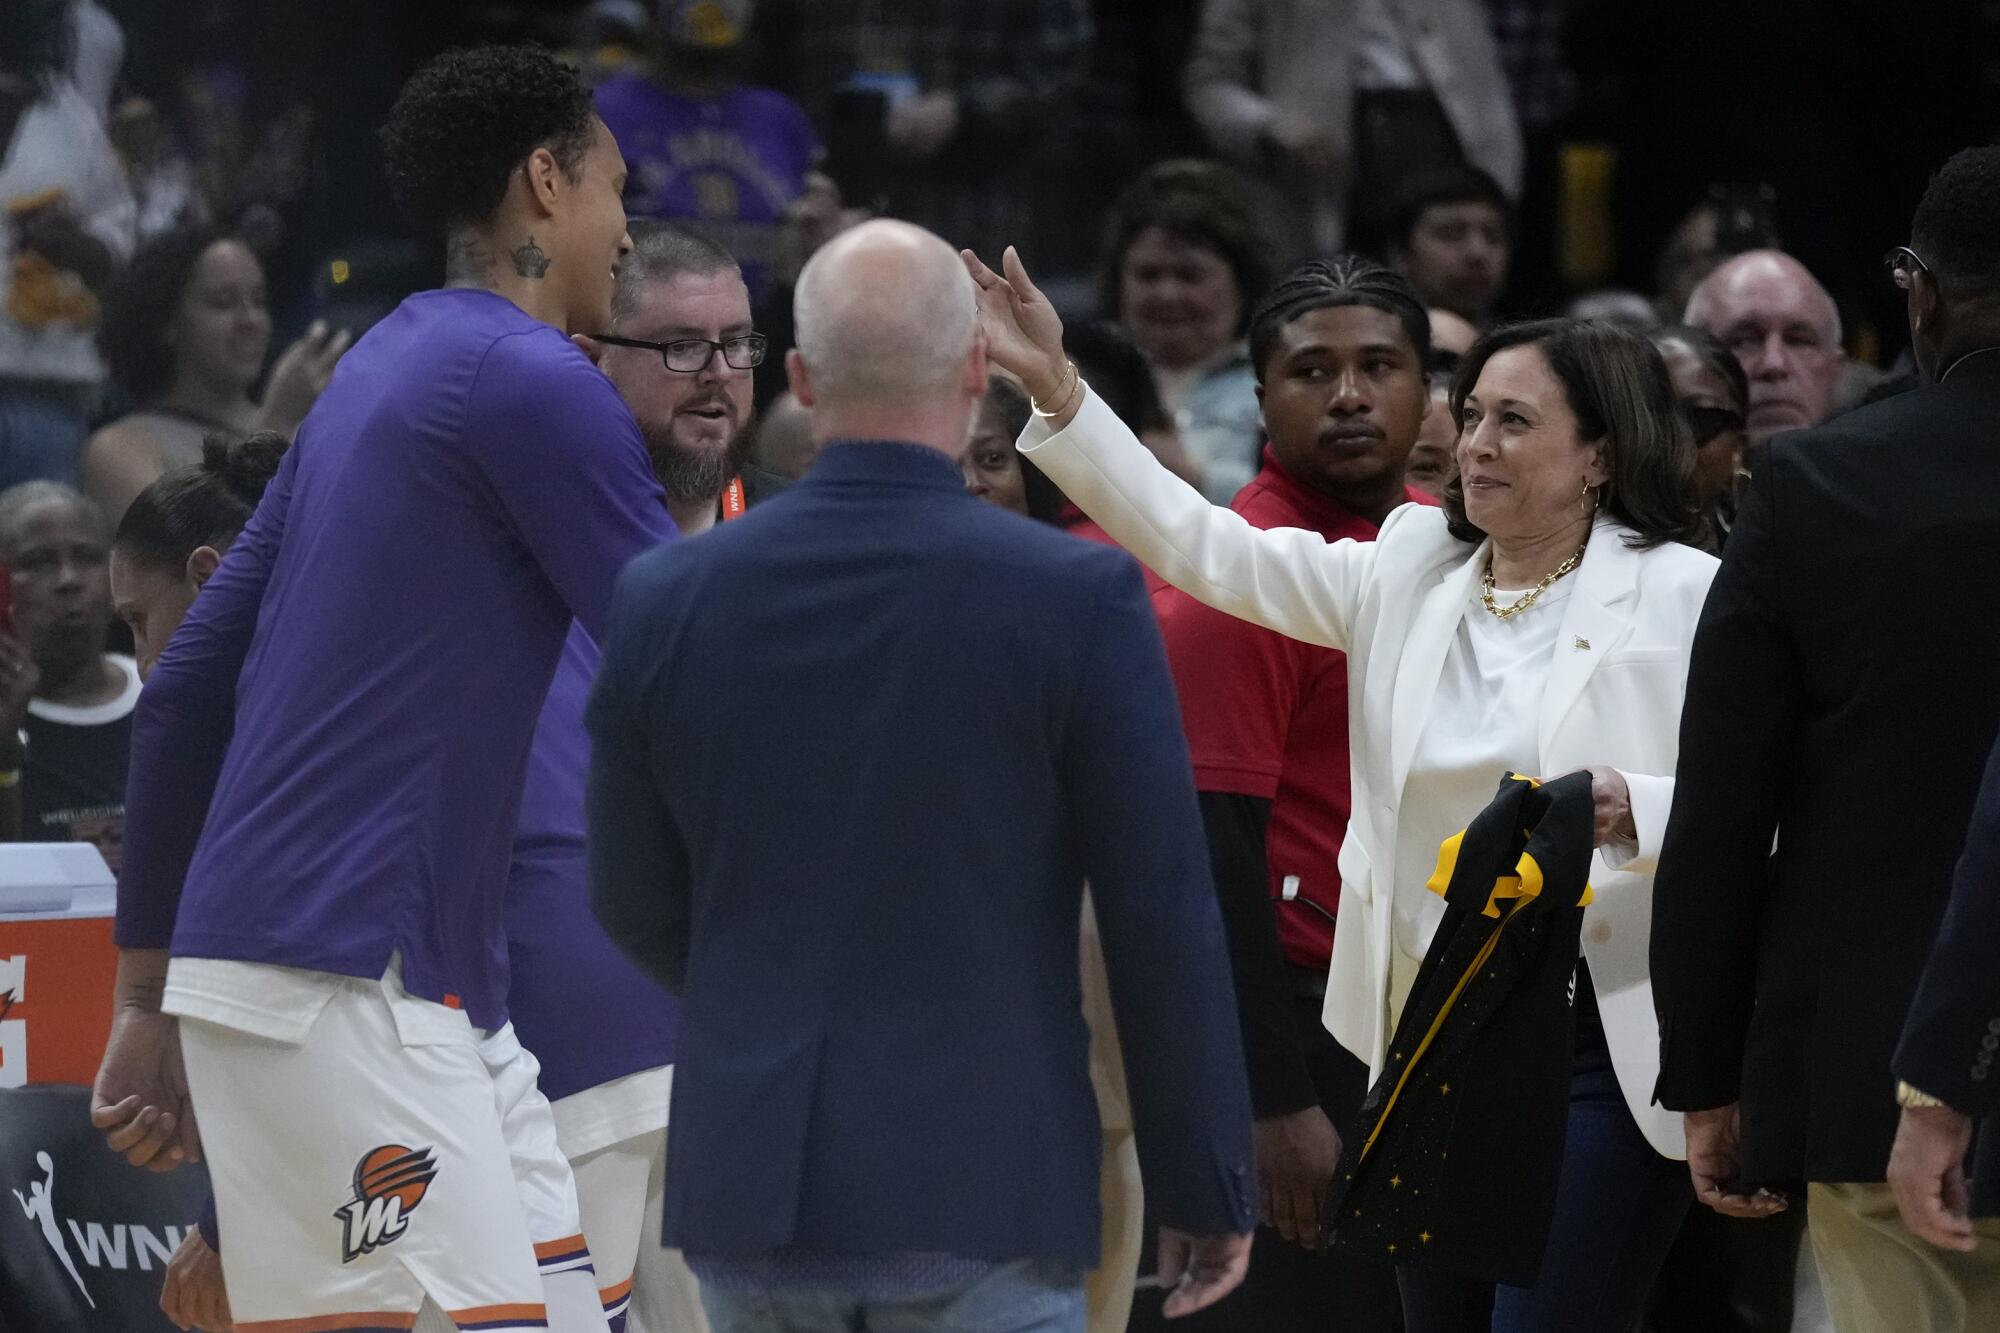 Phoenix Mercury center Brittney Griner is greeted by Vice President Kamala Harris and leans forward for a hug.